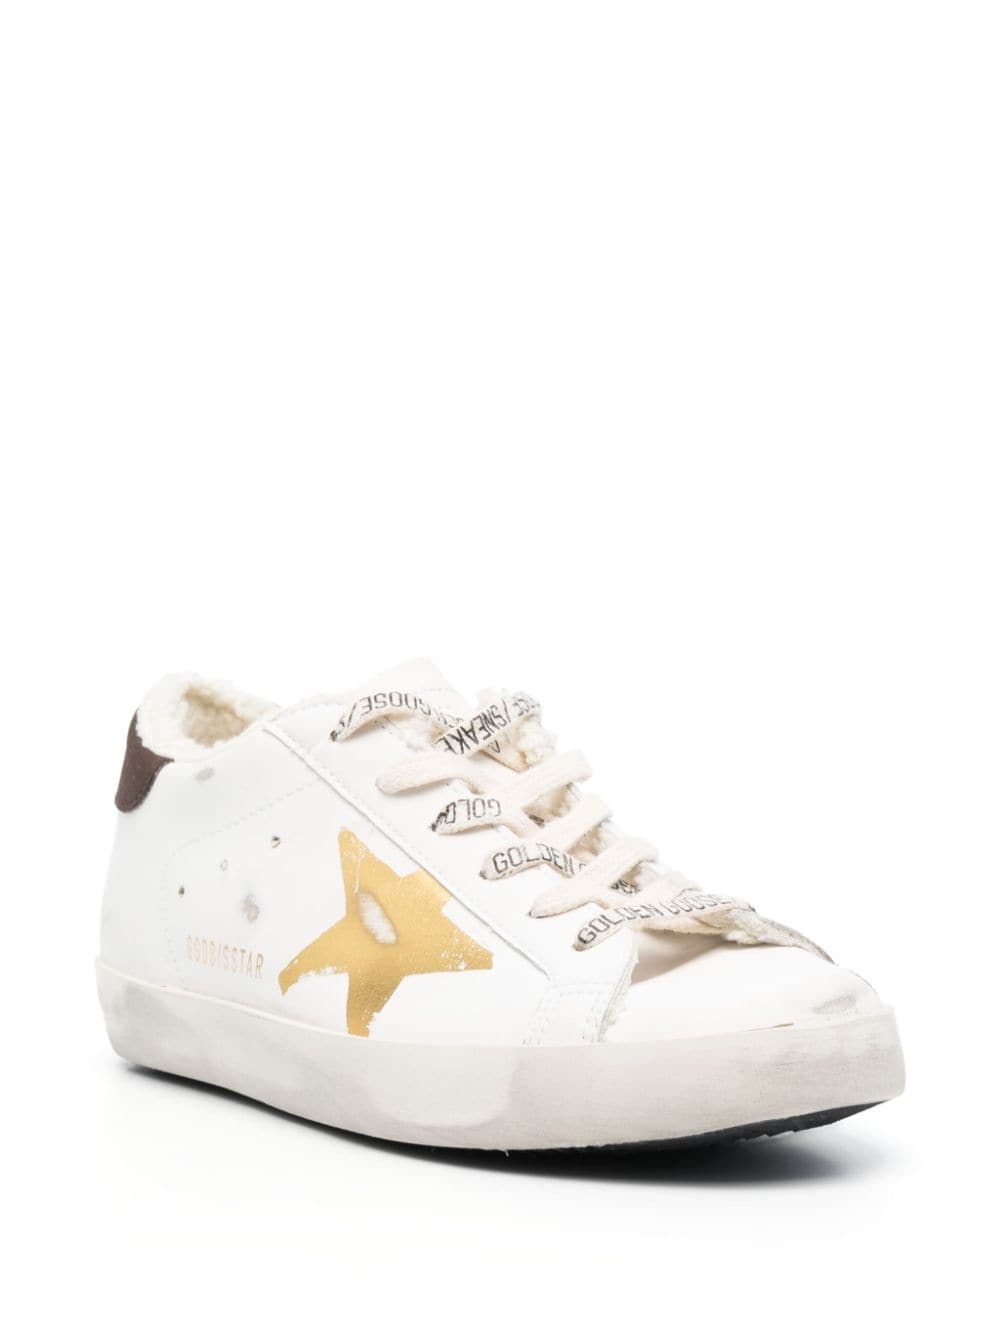 Women's Super-Star with black heel tab and metal stud lettering